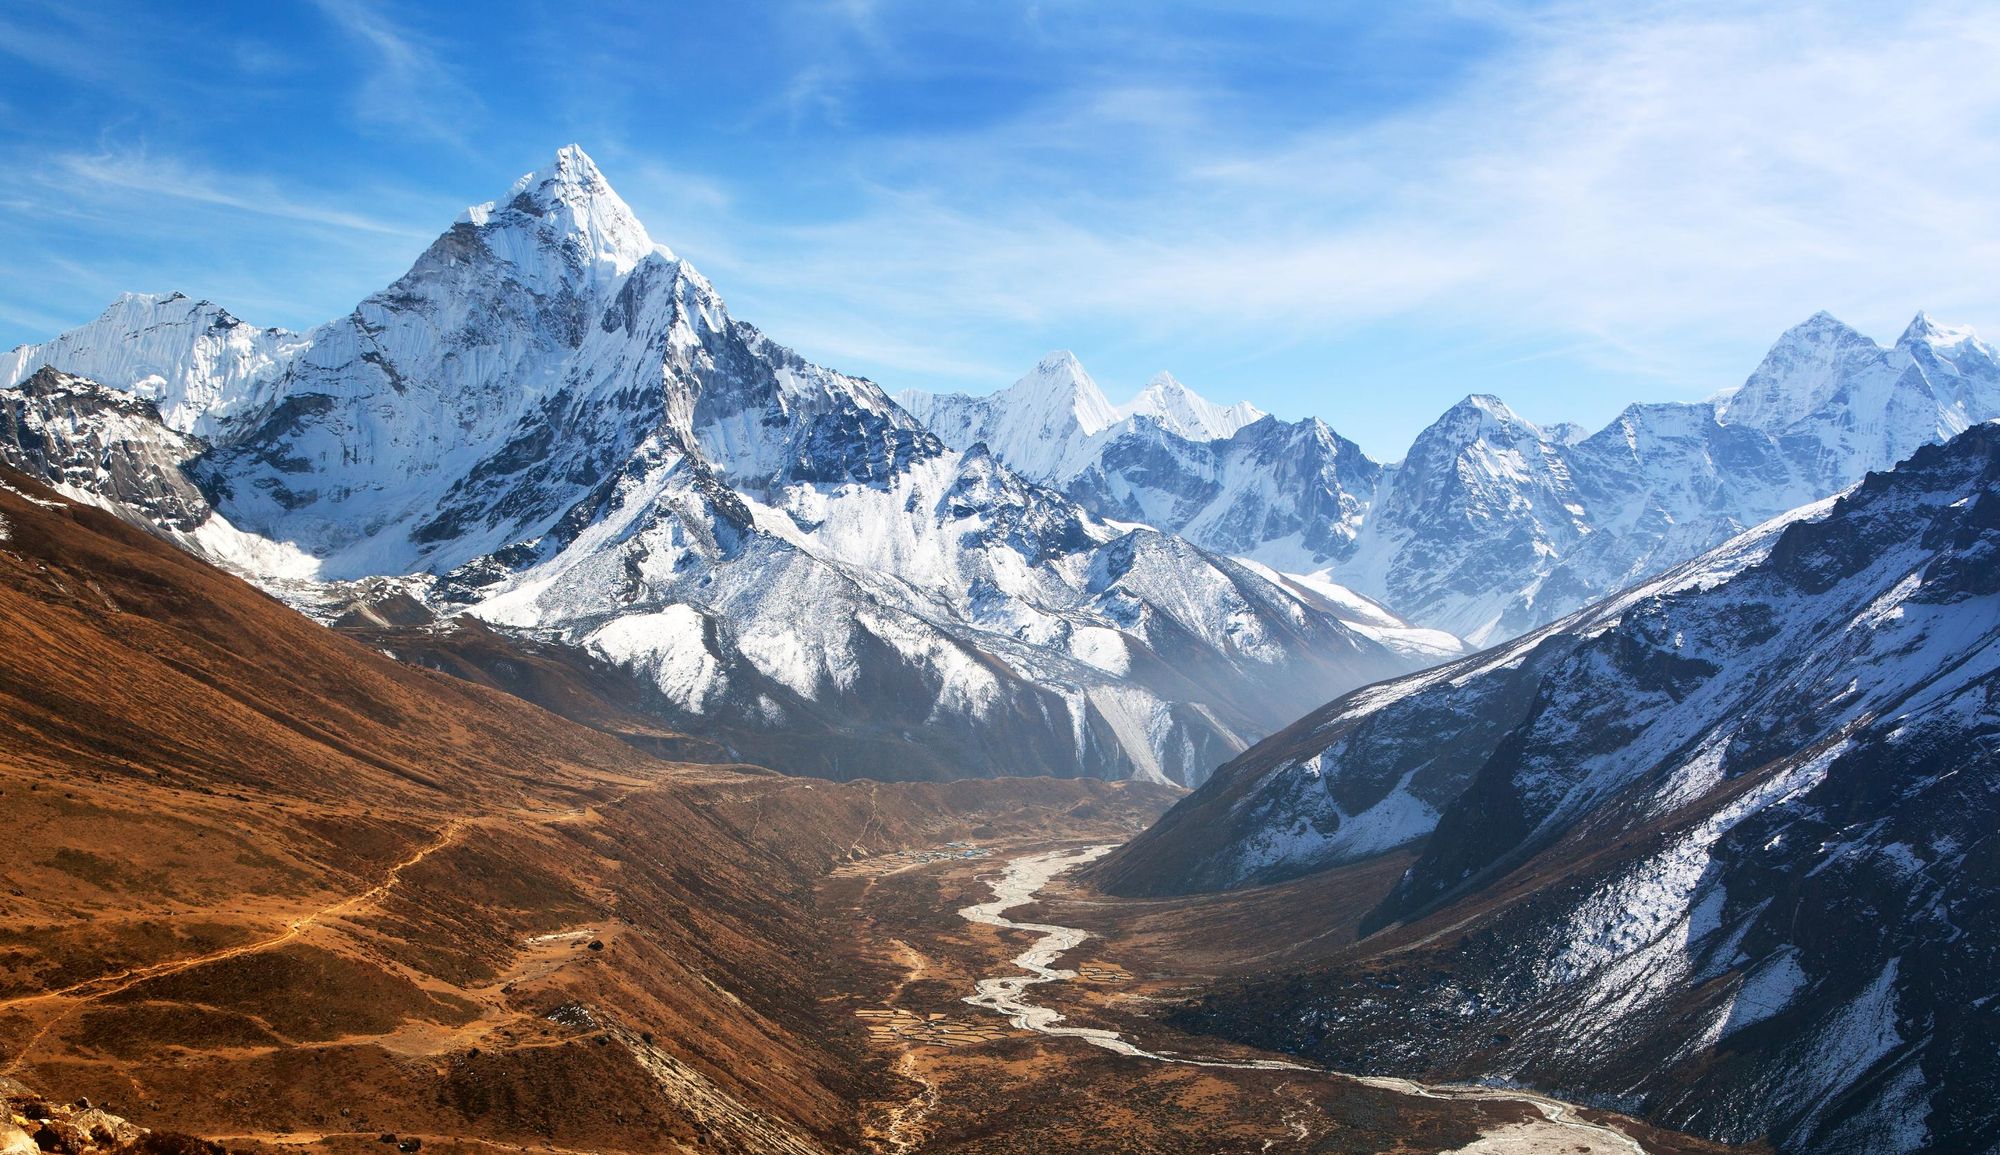 A panoramic, beautiful view of Mount Ama Dablam, on the way to Everest base camp. Photo: Getty